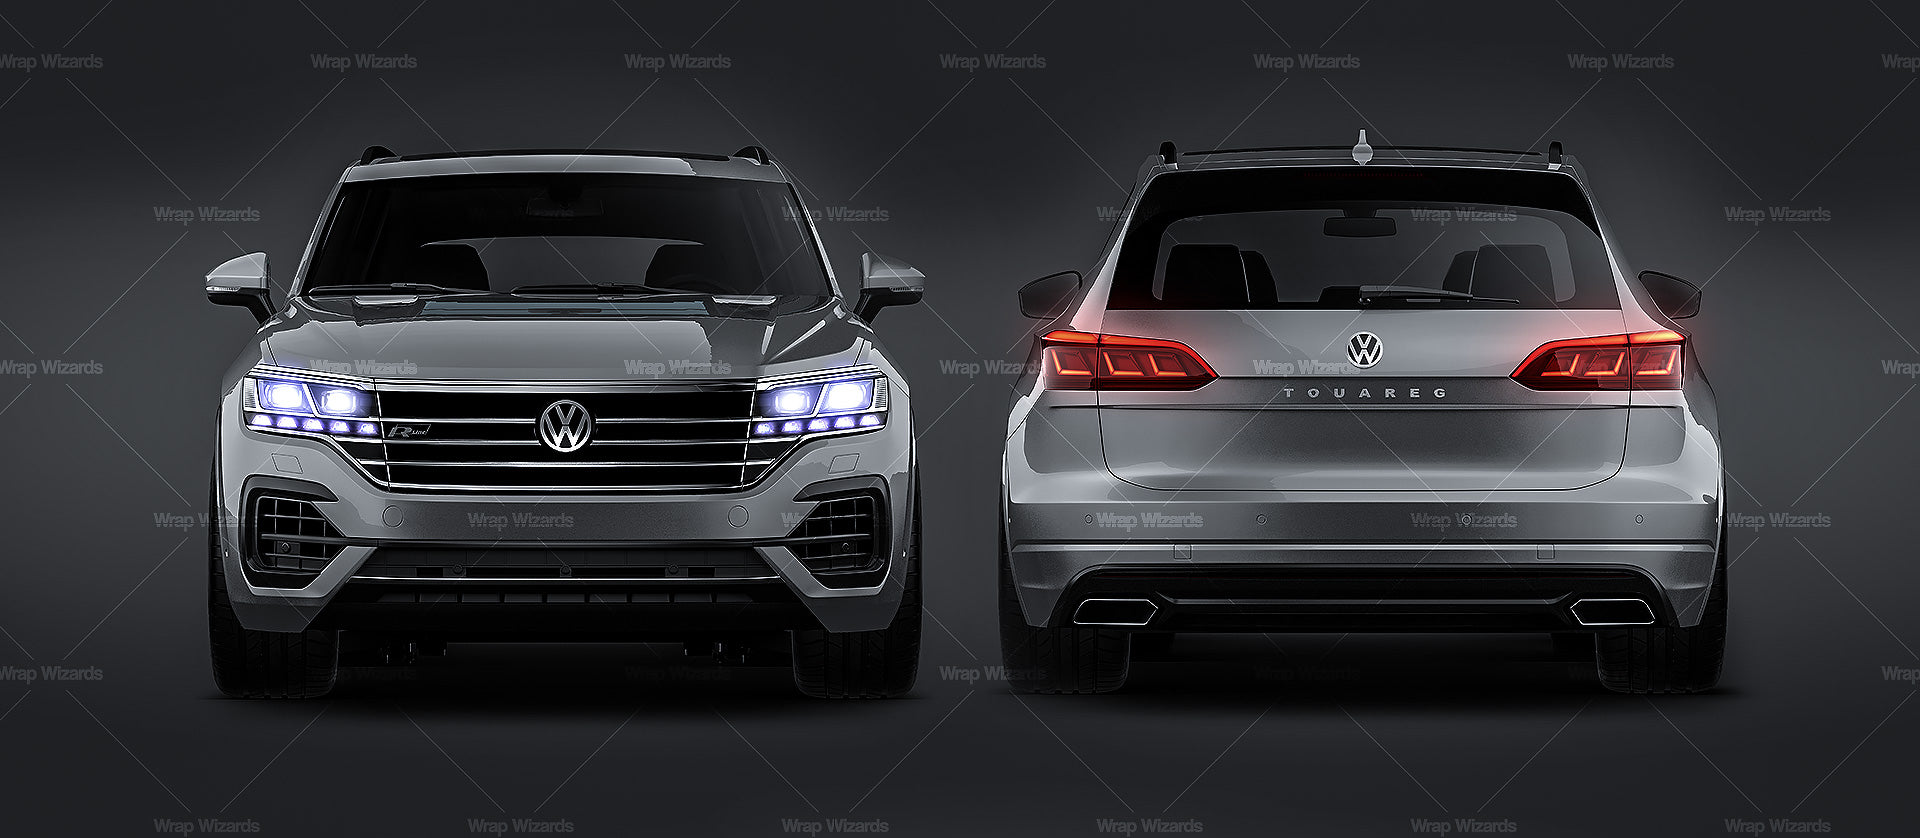 Volkswagen Touareg R-Line glossy finish - all sides Car Mockup Template.psd